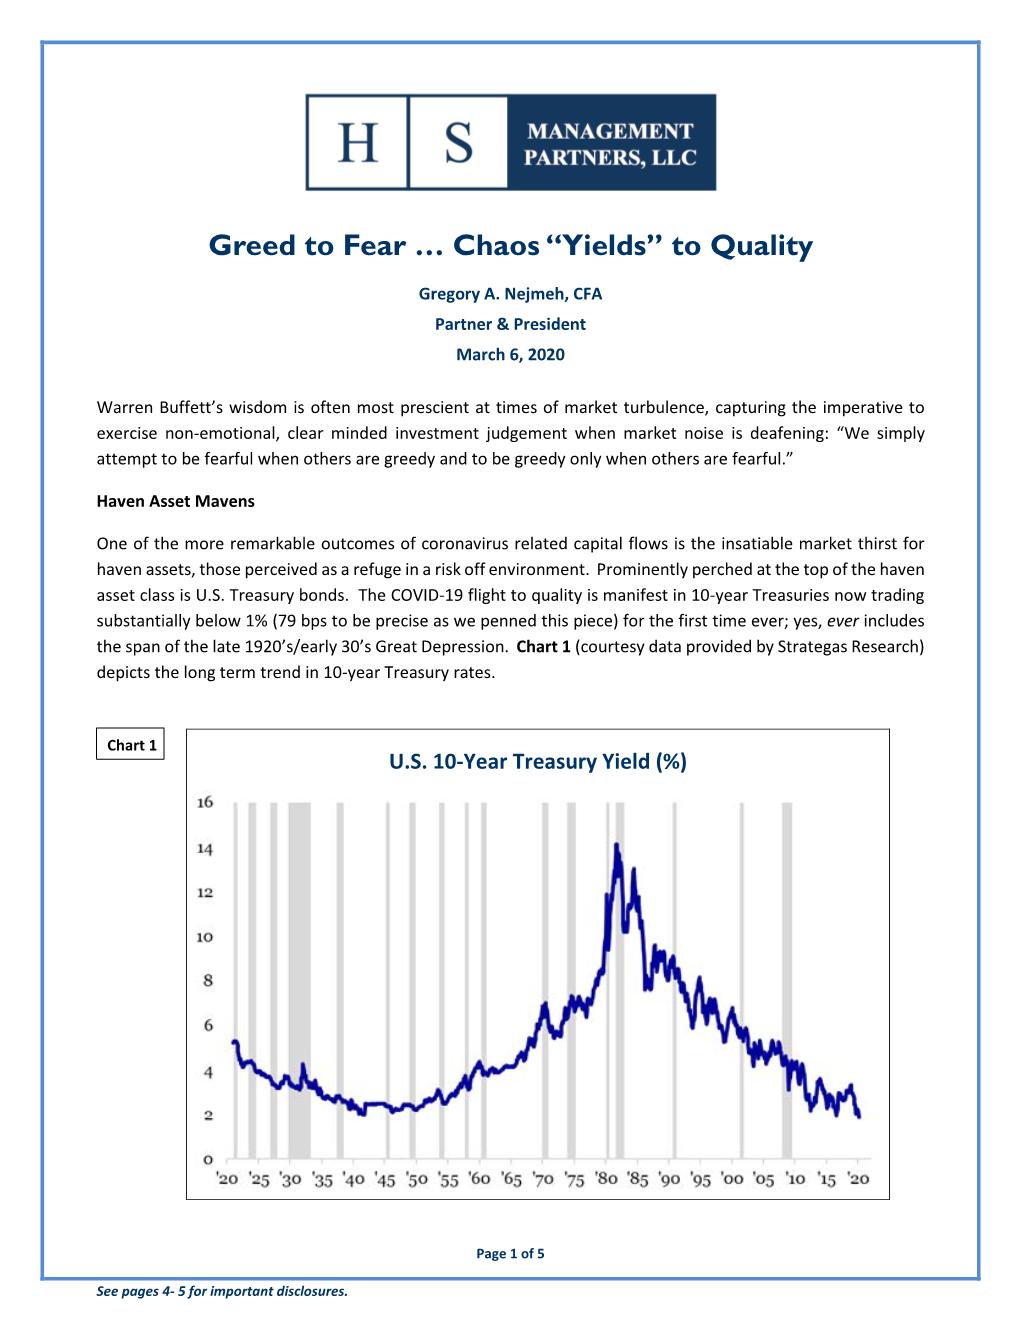 Greed to Fear … Chaos “Yields” to Quality